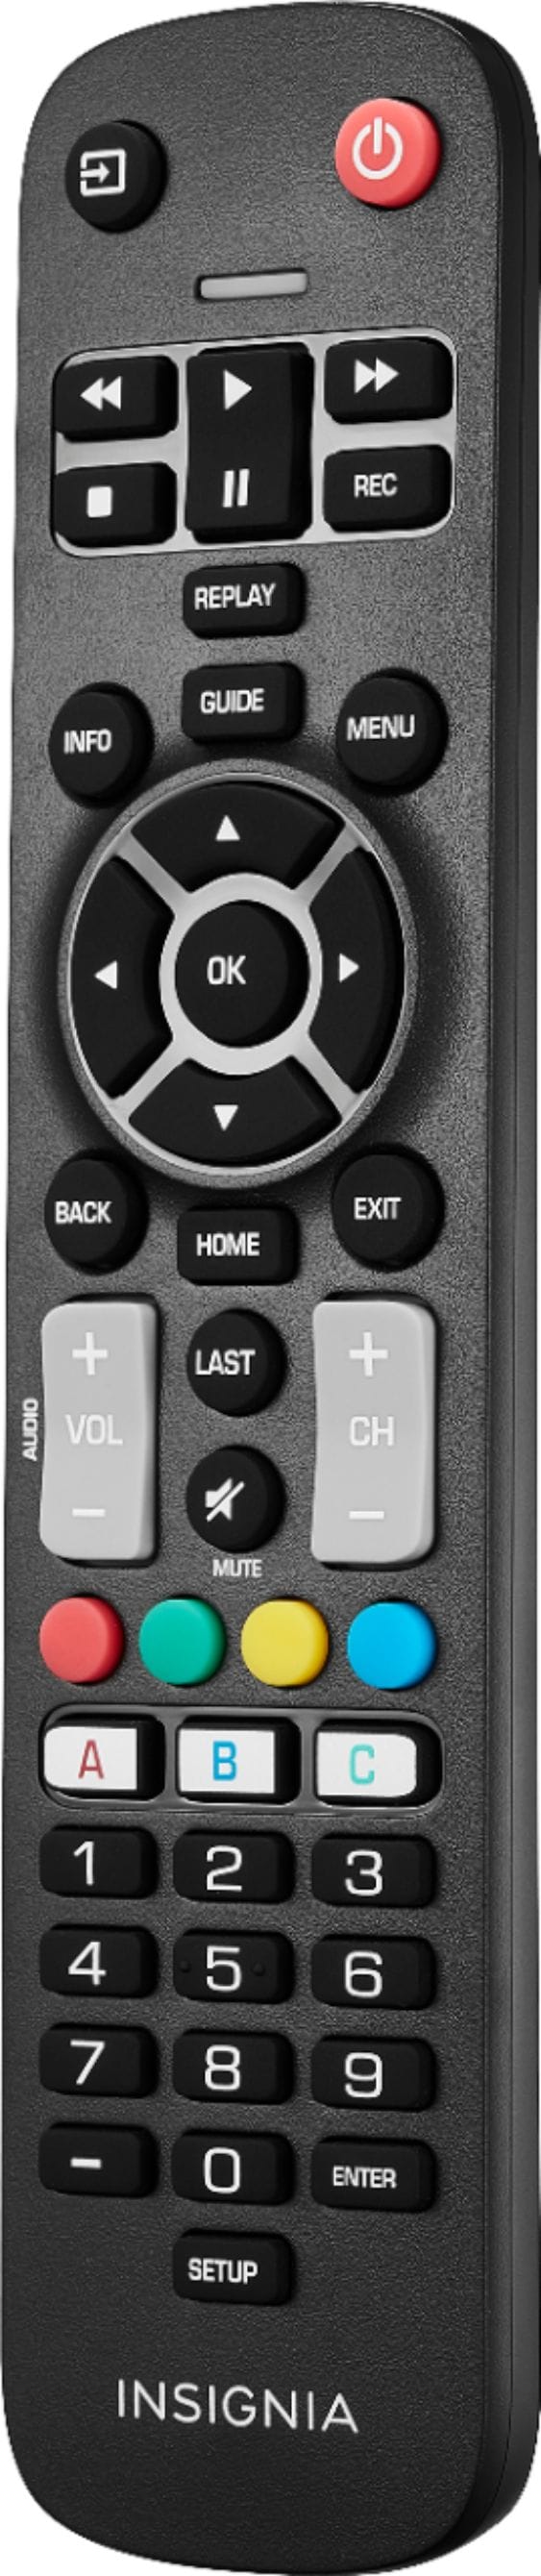 Insignia™ - Replacement Remote for Insignia and Dynex TVs - Black_4